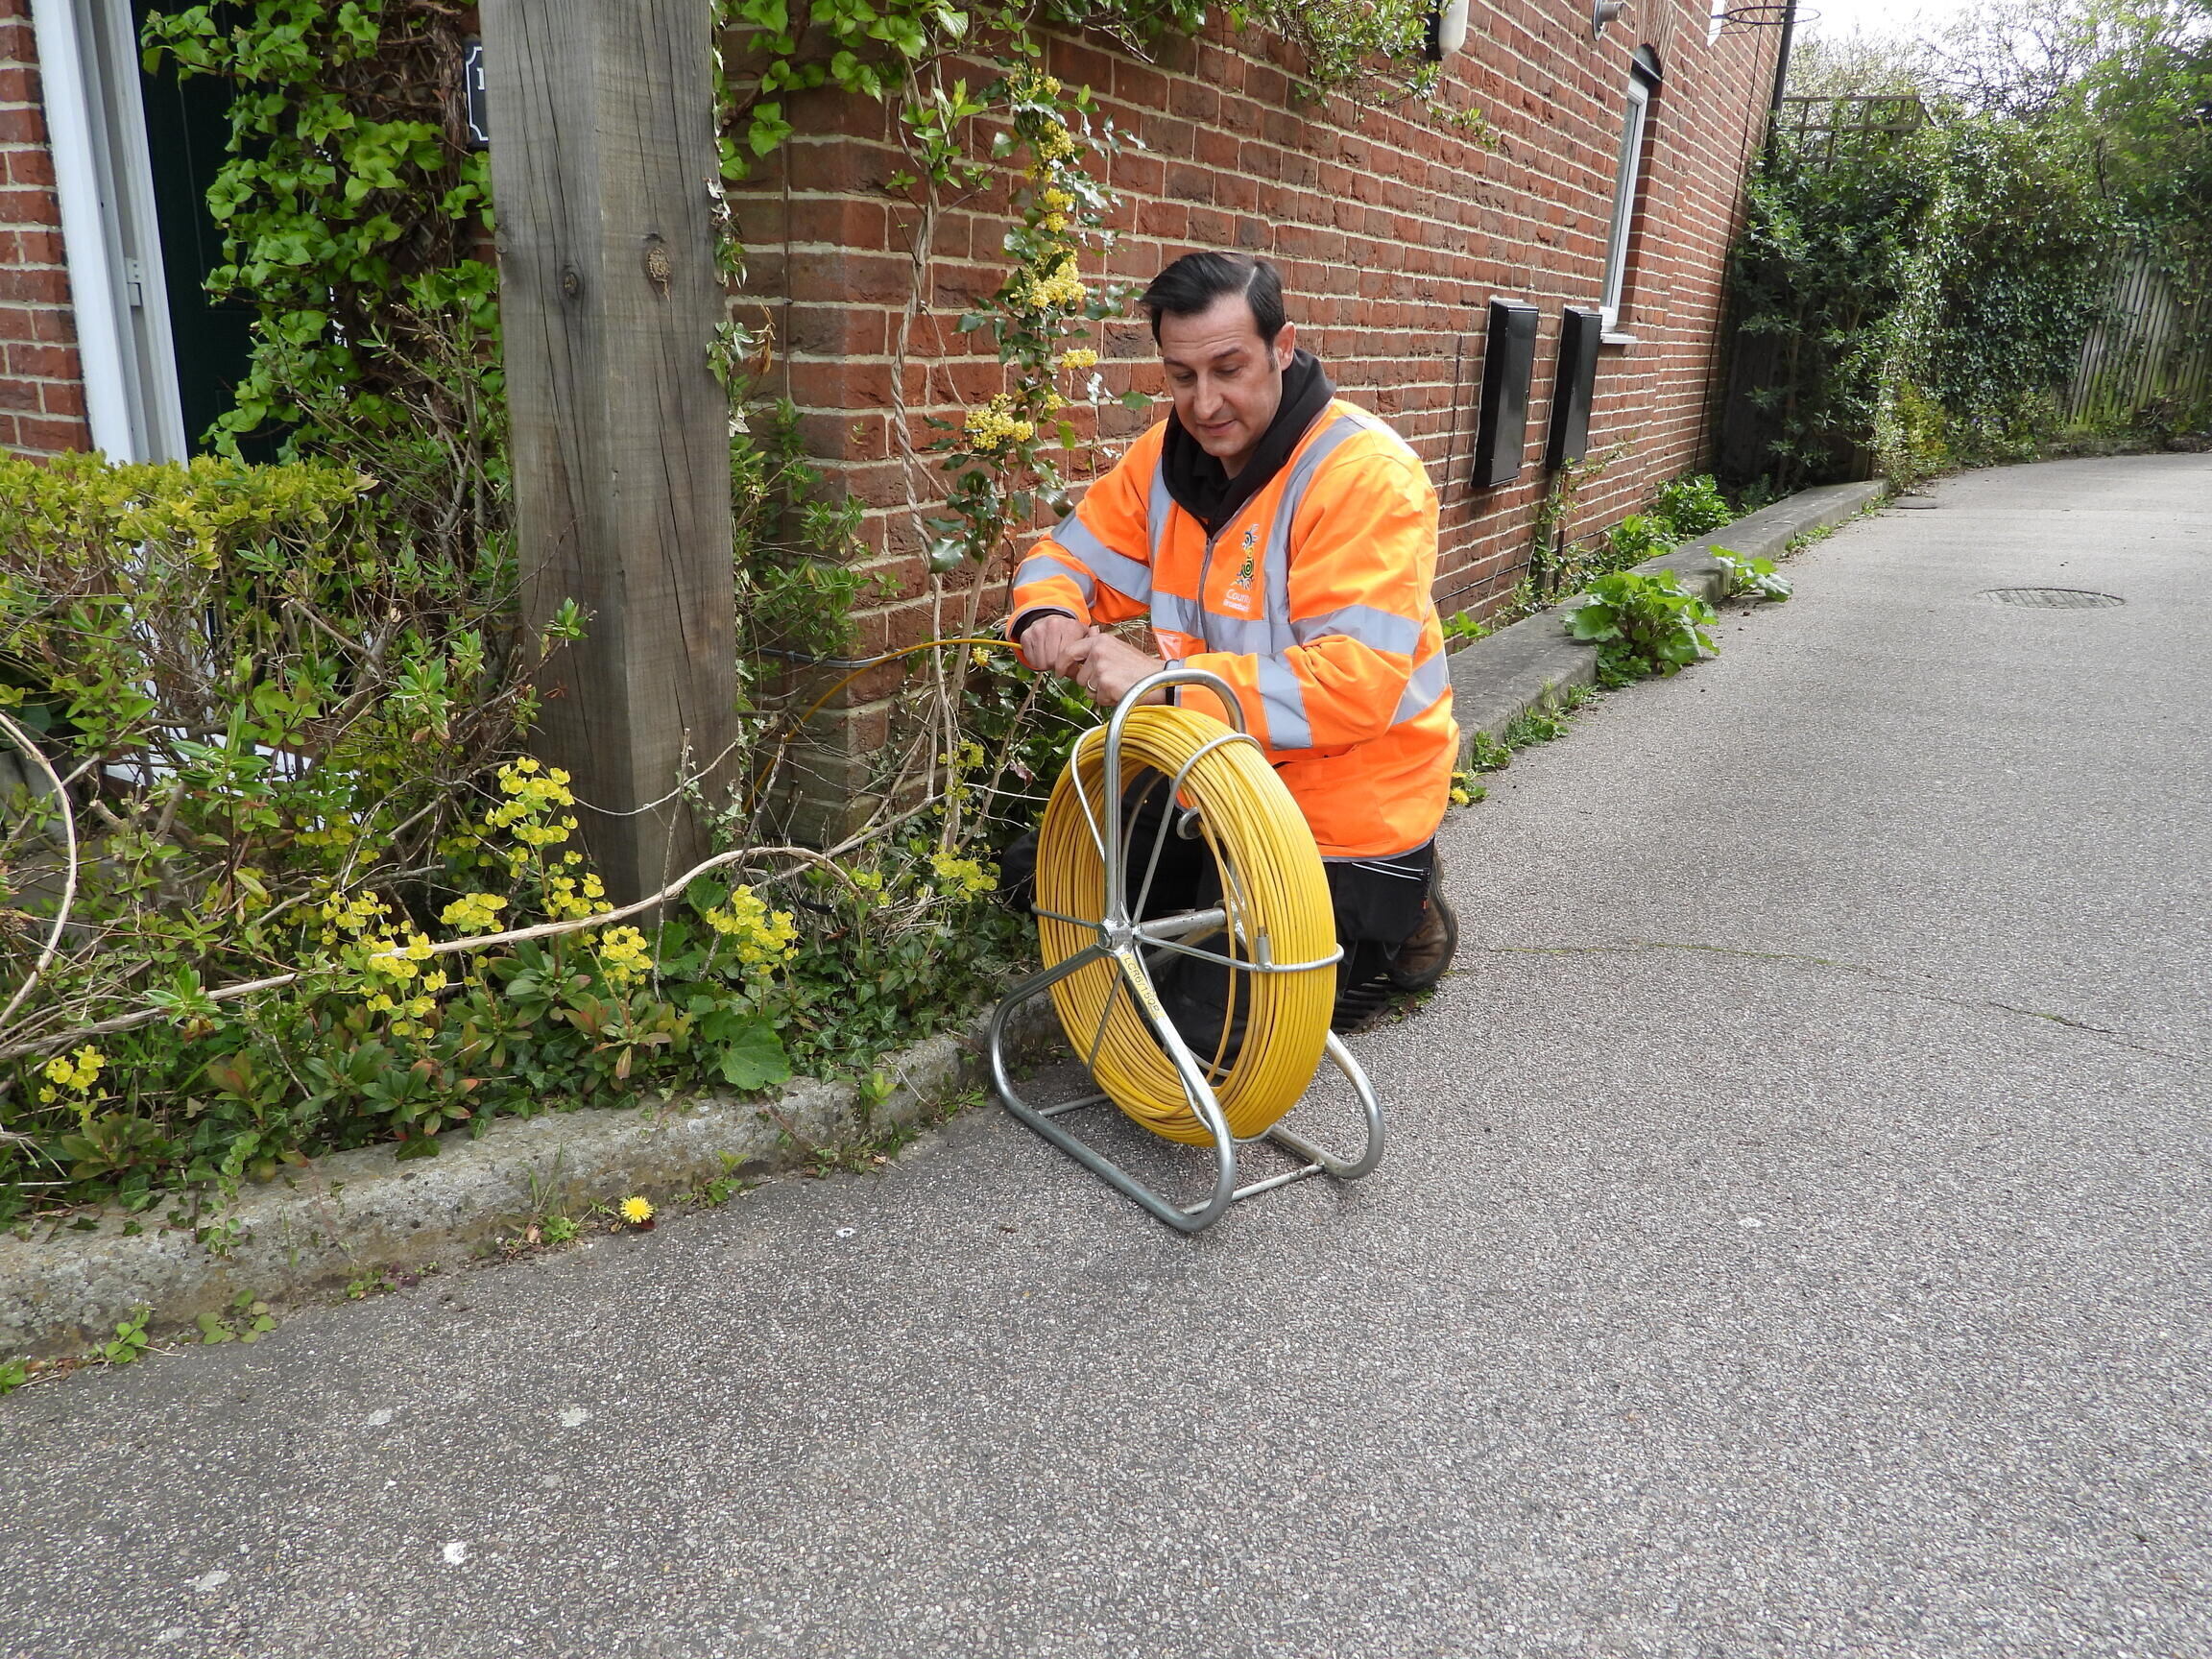 More Essex villages go live with full fibre broadband infrastructure after work completes